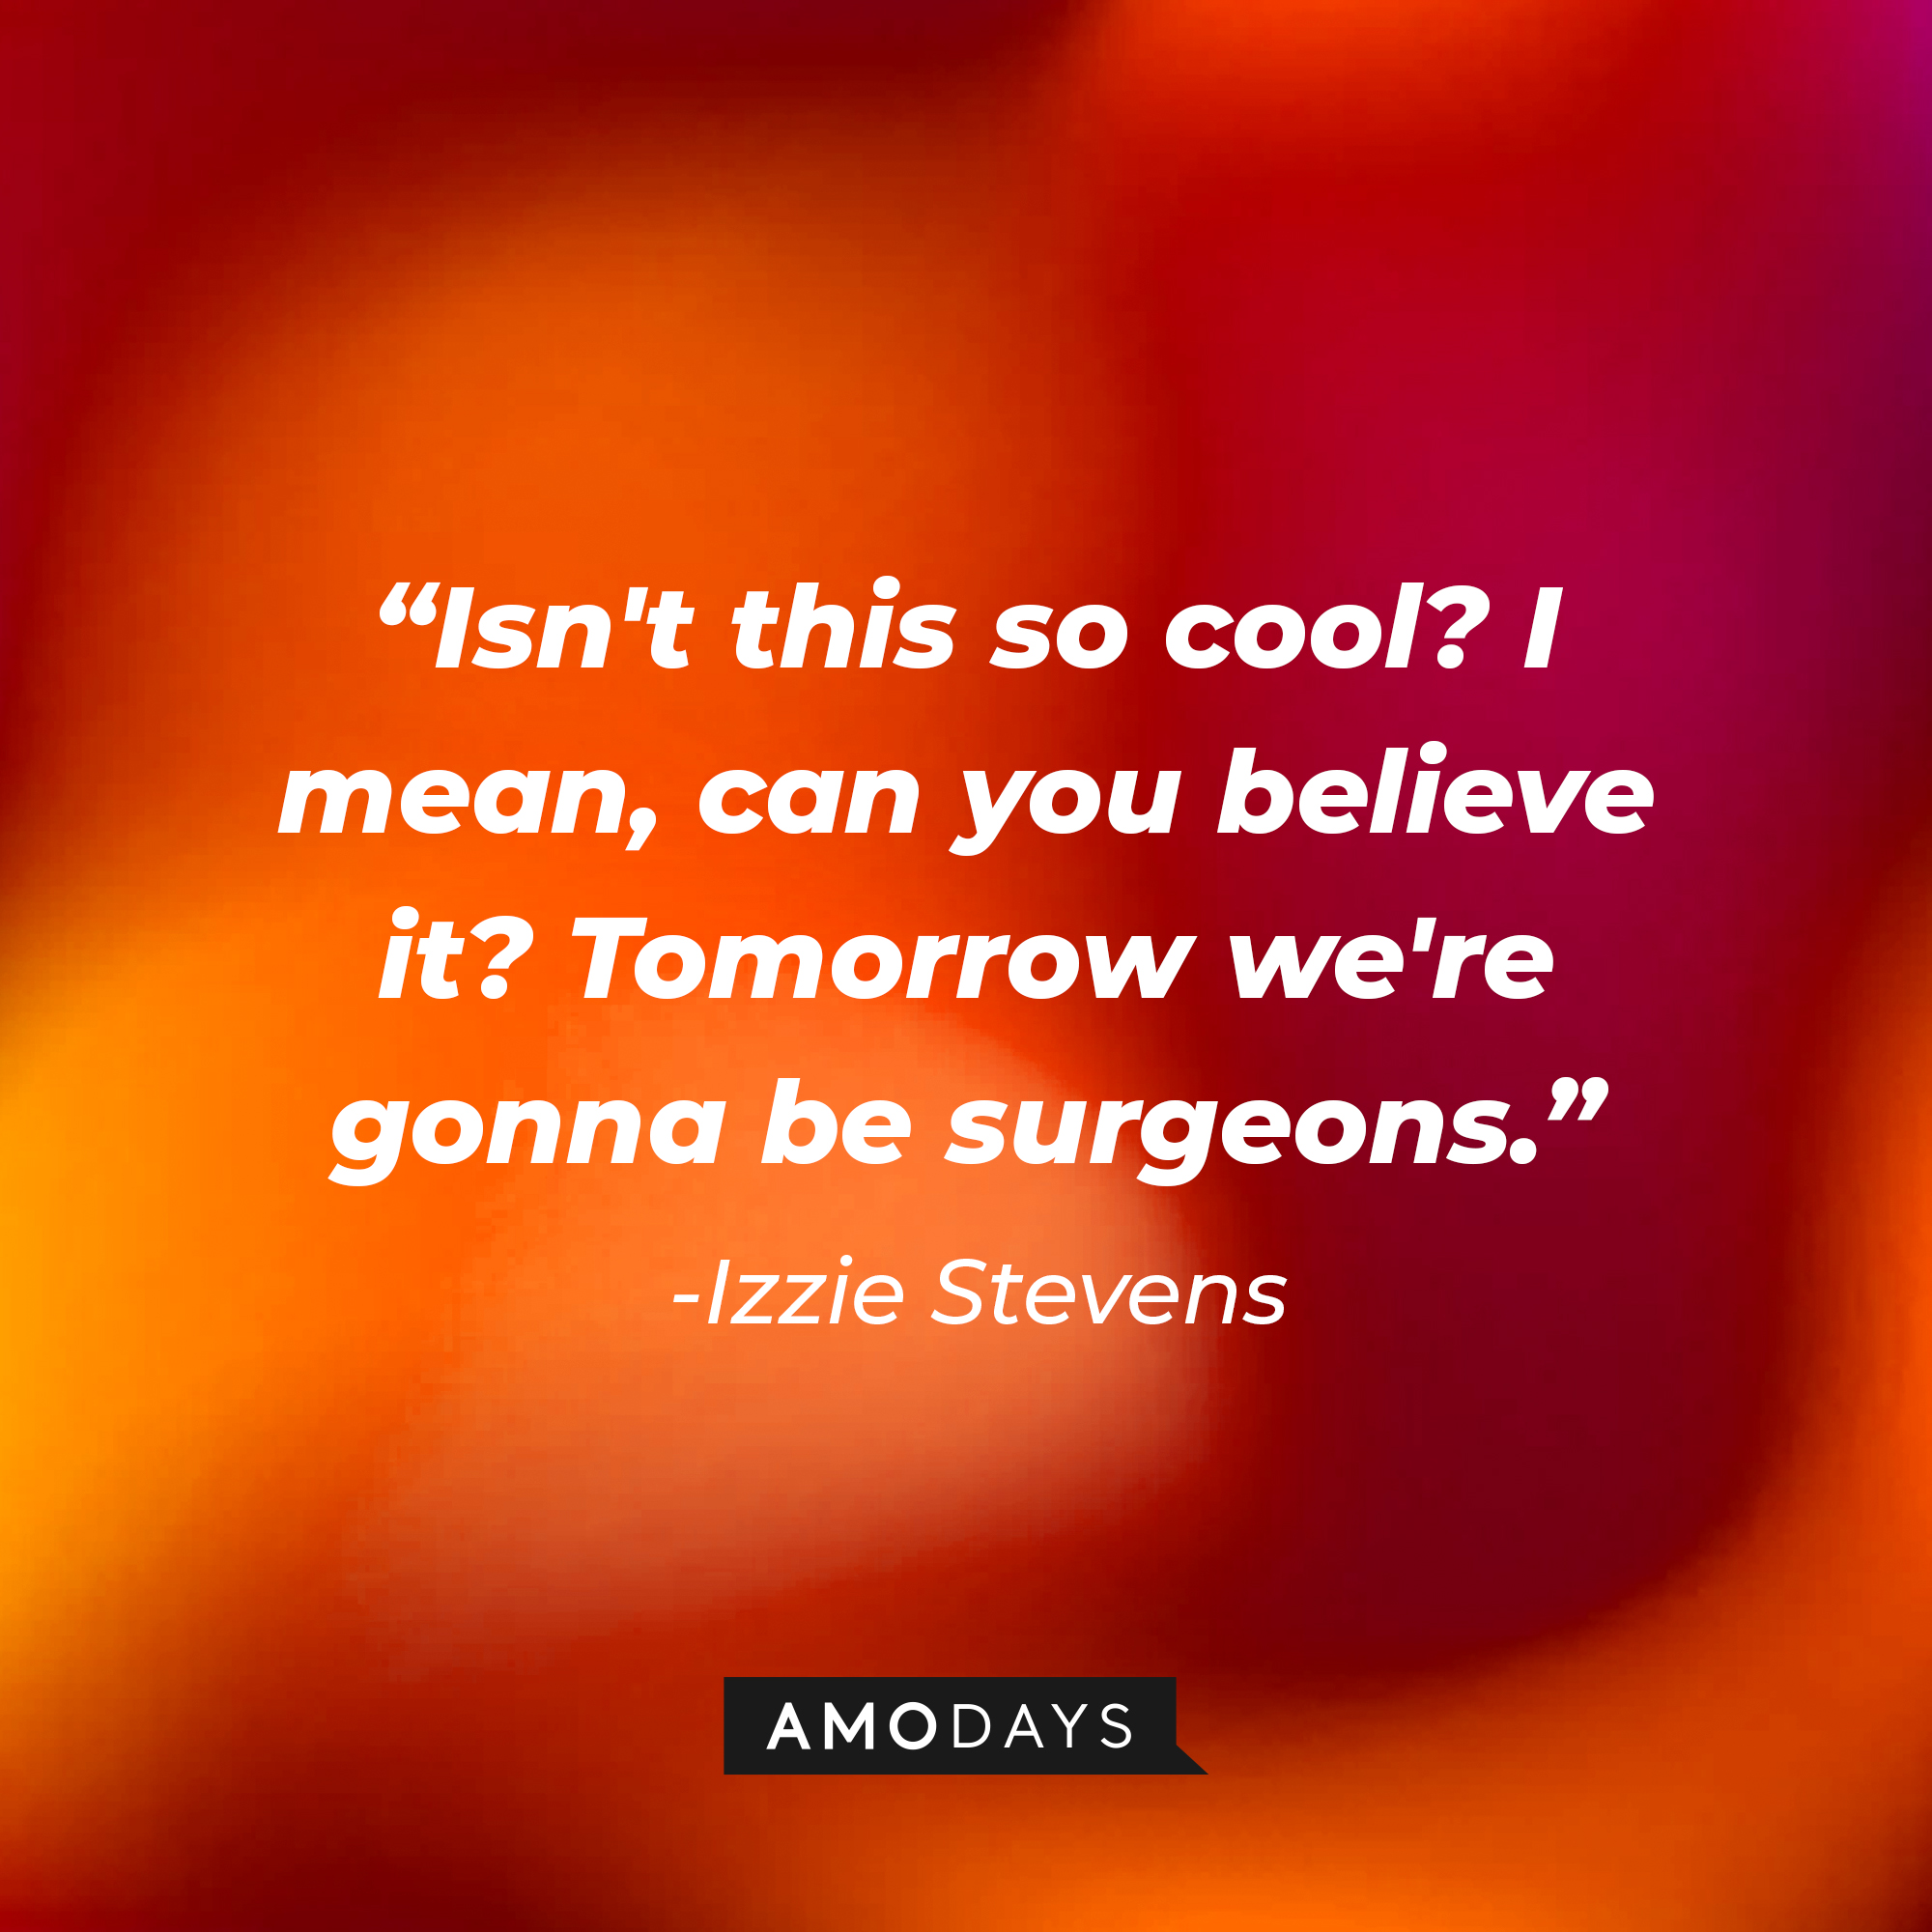 Izzie Stevens's quote: "Isn't this so cool? I mean, can you believe it? Tomorrow we're gonna be surgeons." | Image: Amodays